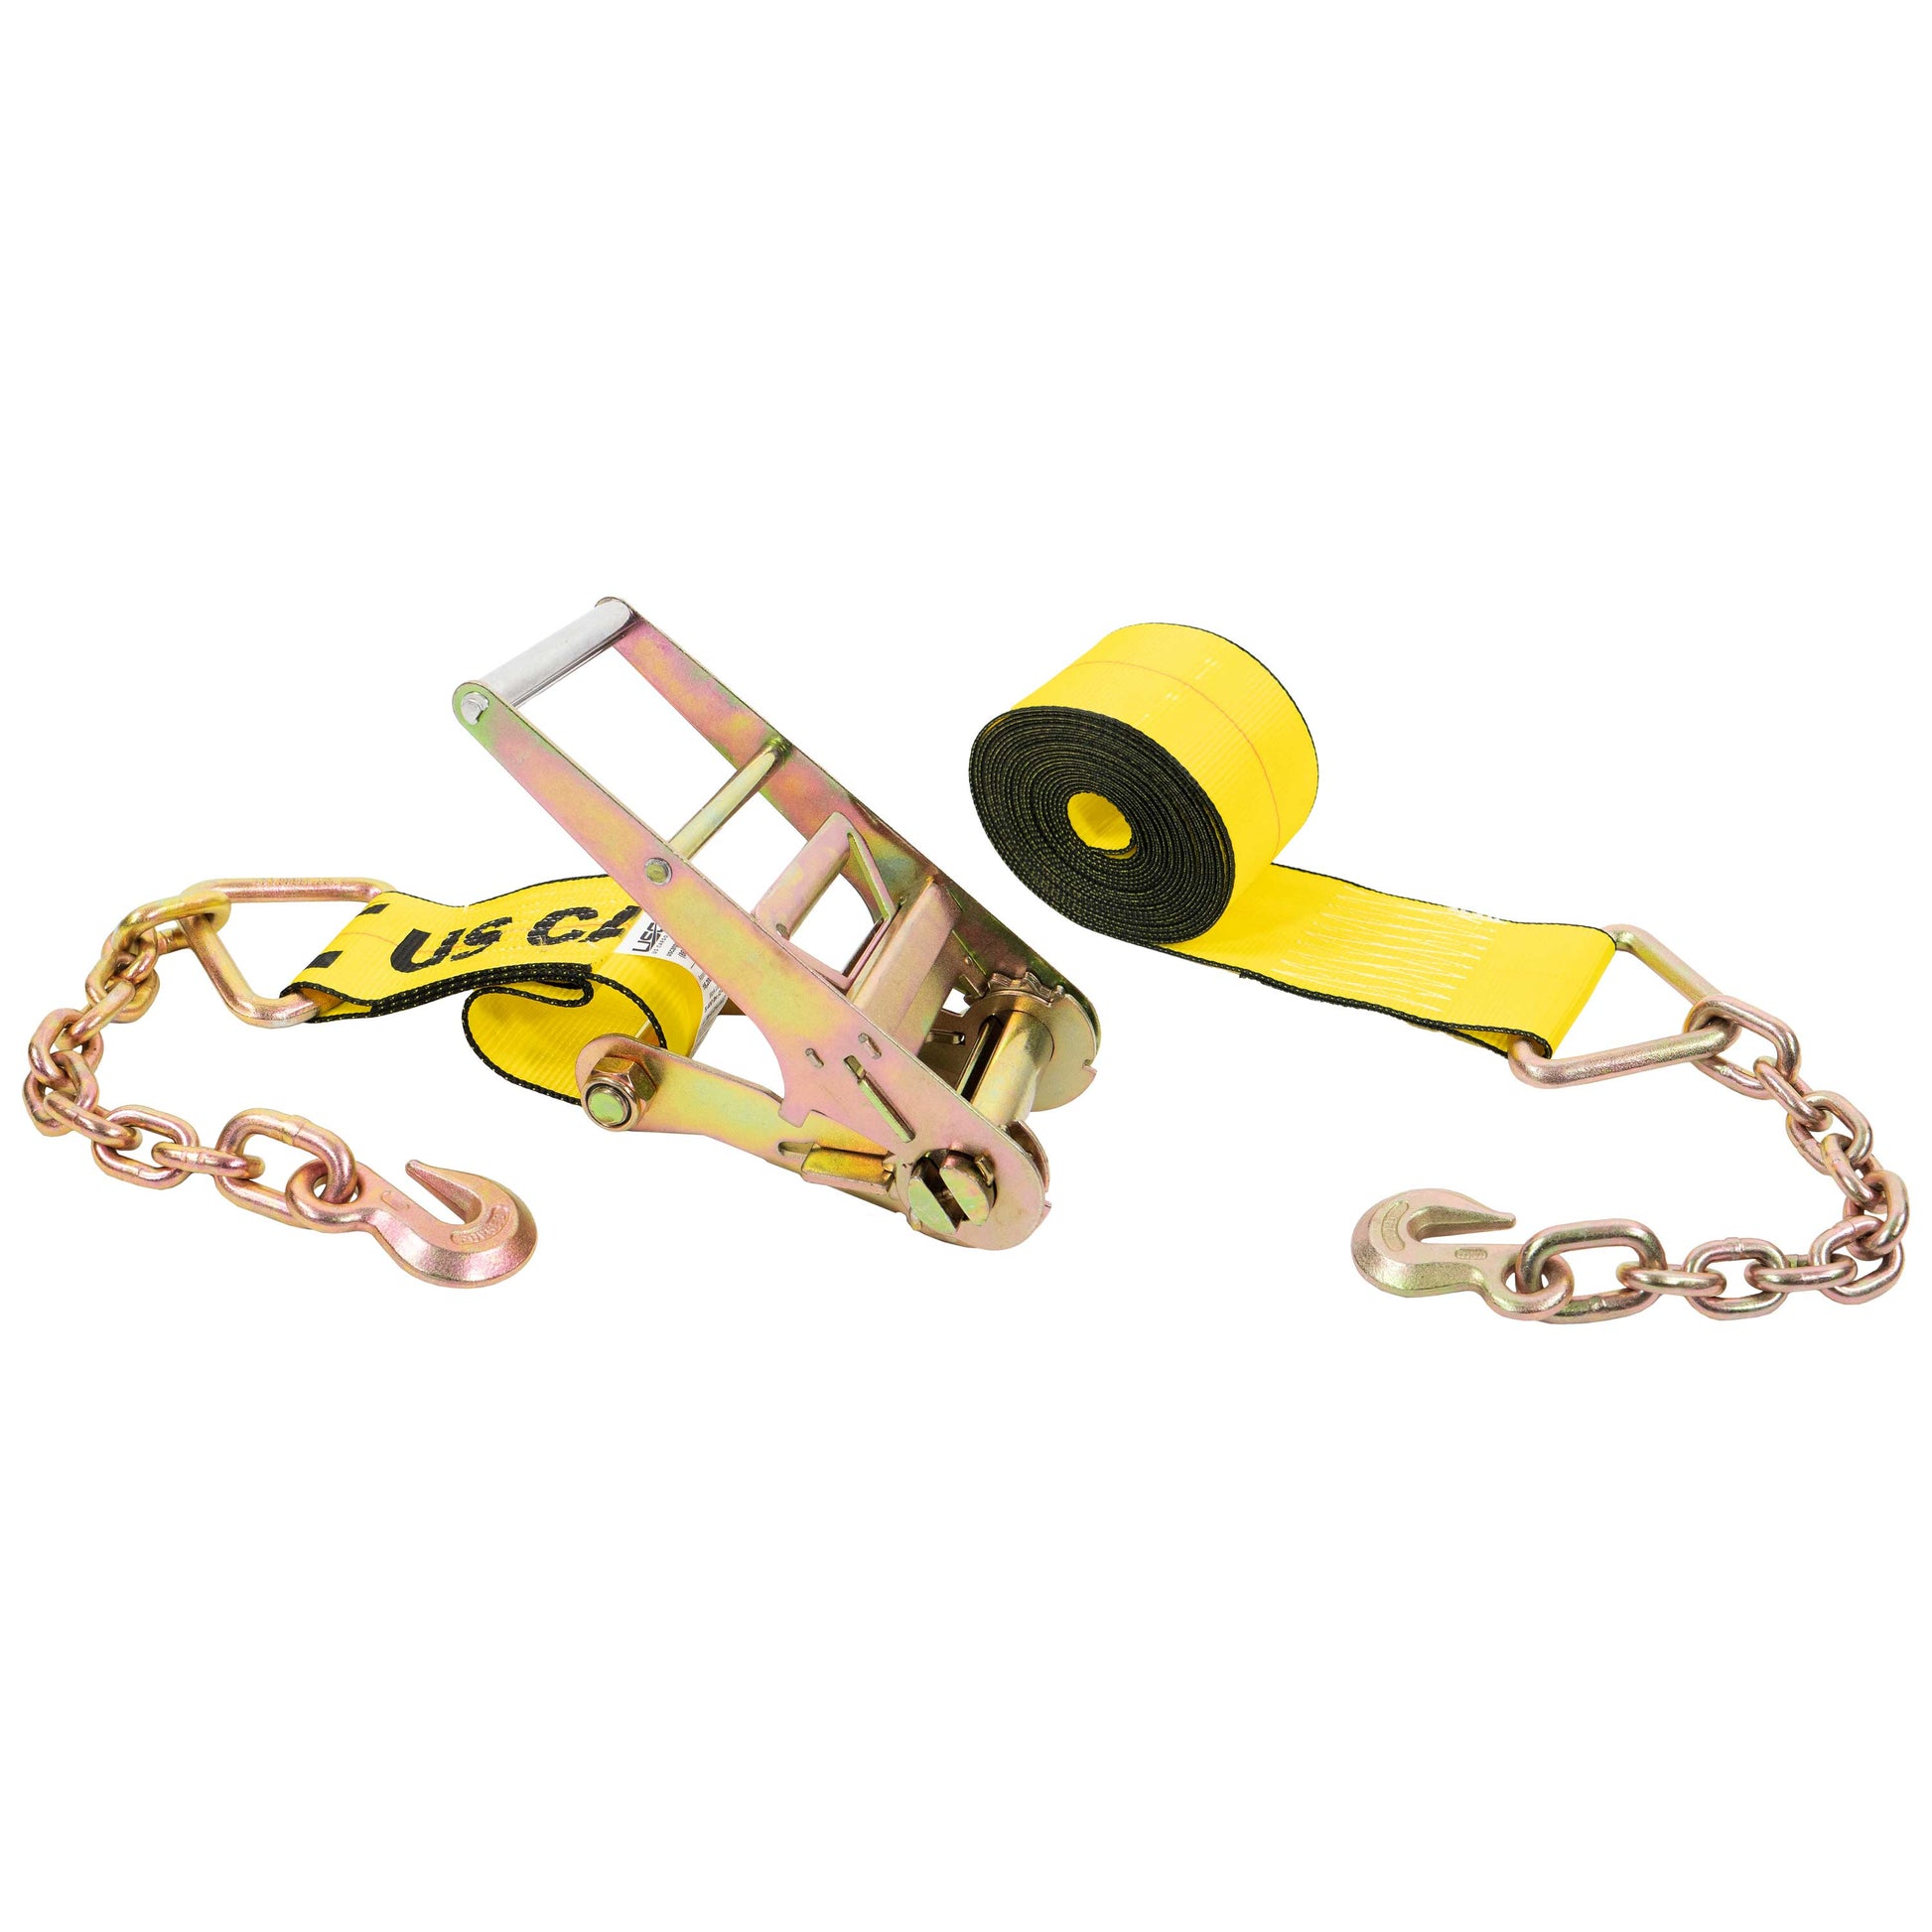 20' 4" heavy-duty yellow chain extension ratchet strap